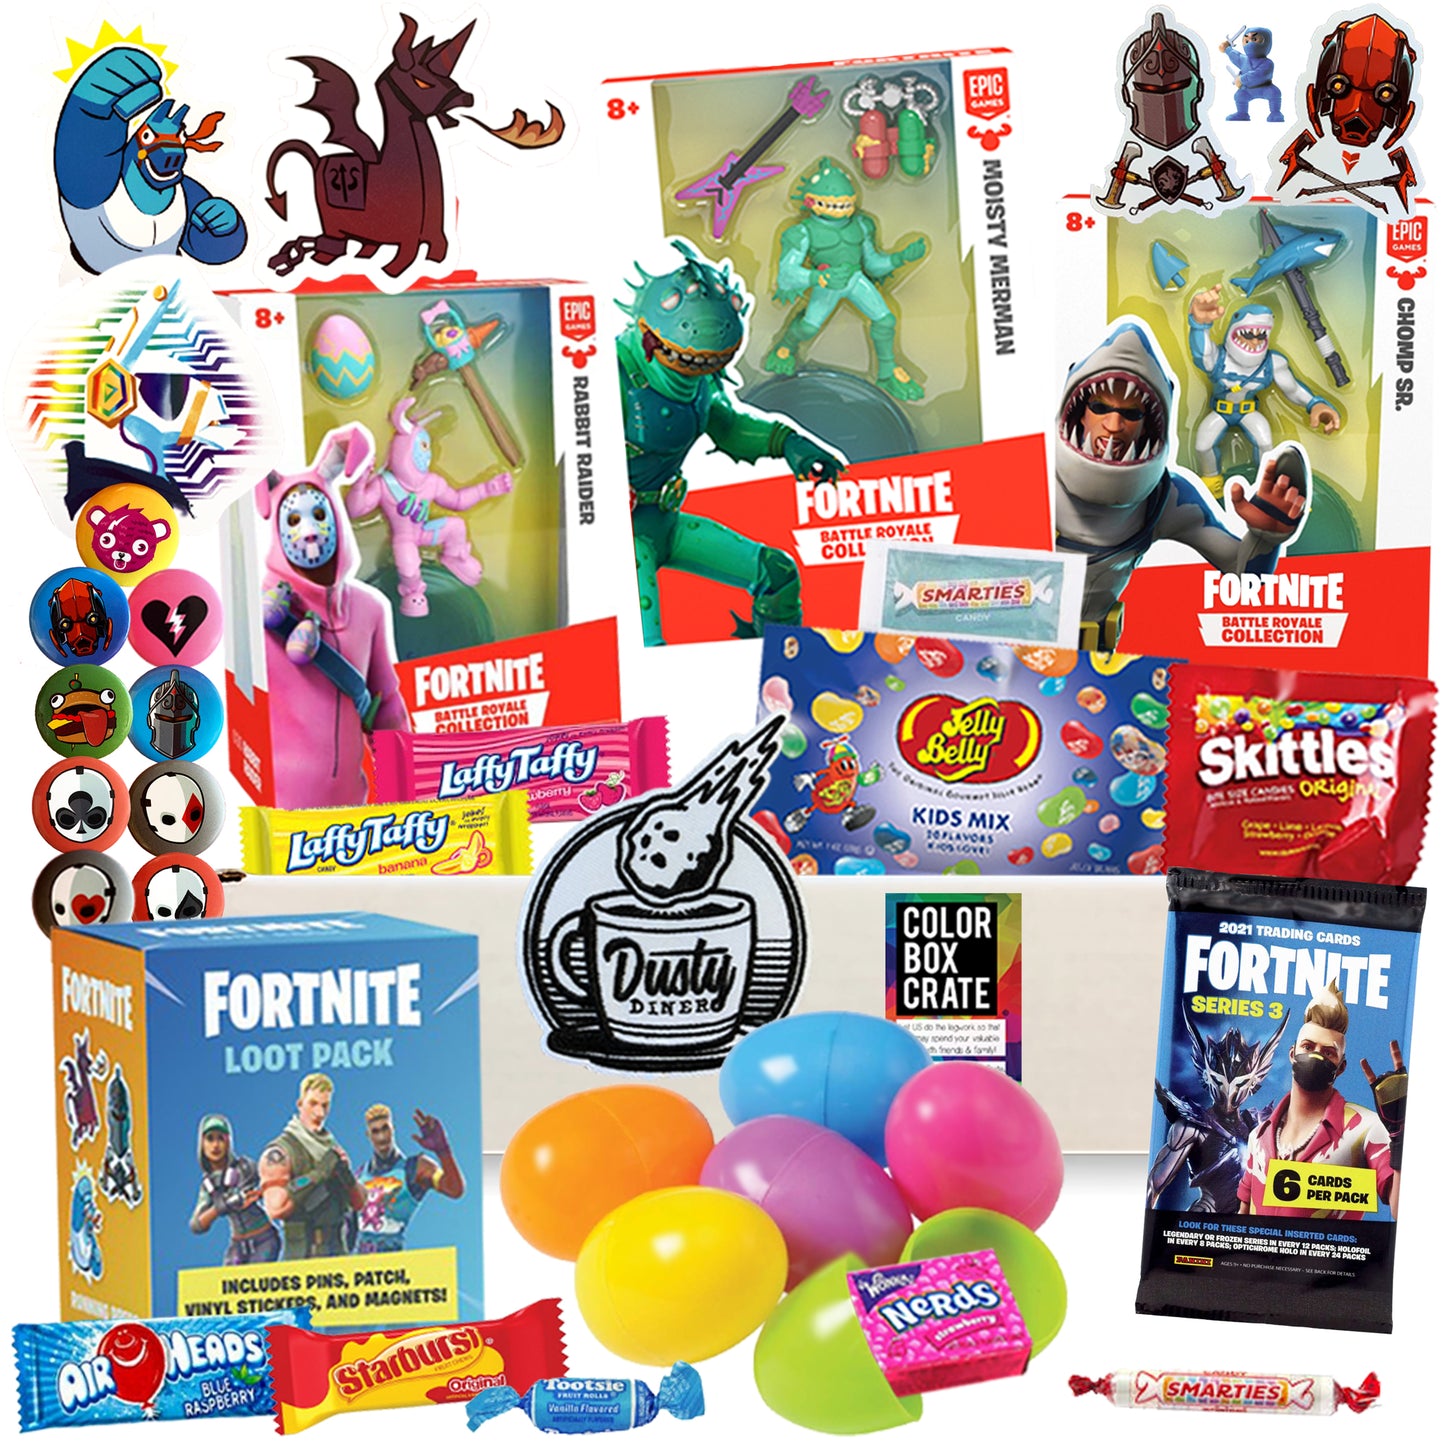 Fortnite Battle Royale Easter Basket Care Package, 20pc Set, with Battle Royale Gaming Action Figure, Supply Drop Loot Chest Box, Jelly Beans, & More